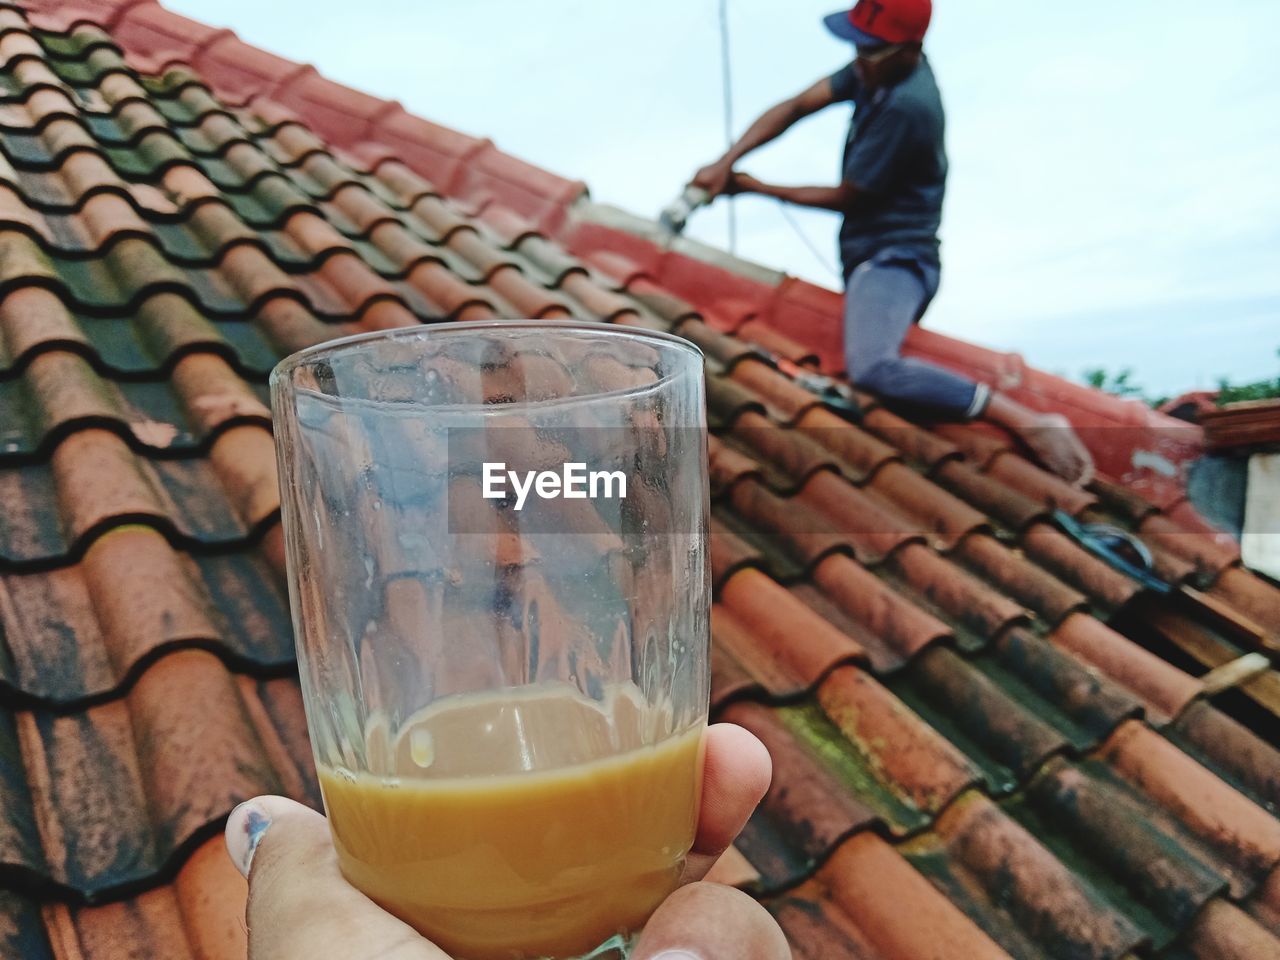 Cropped hand holding tea with man working on roof in background